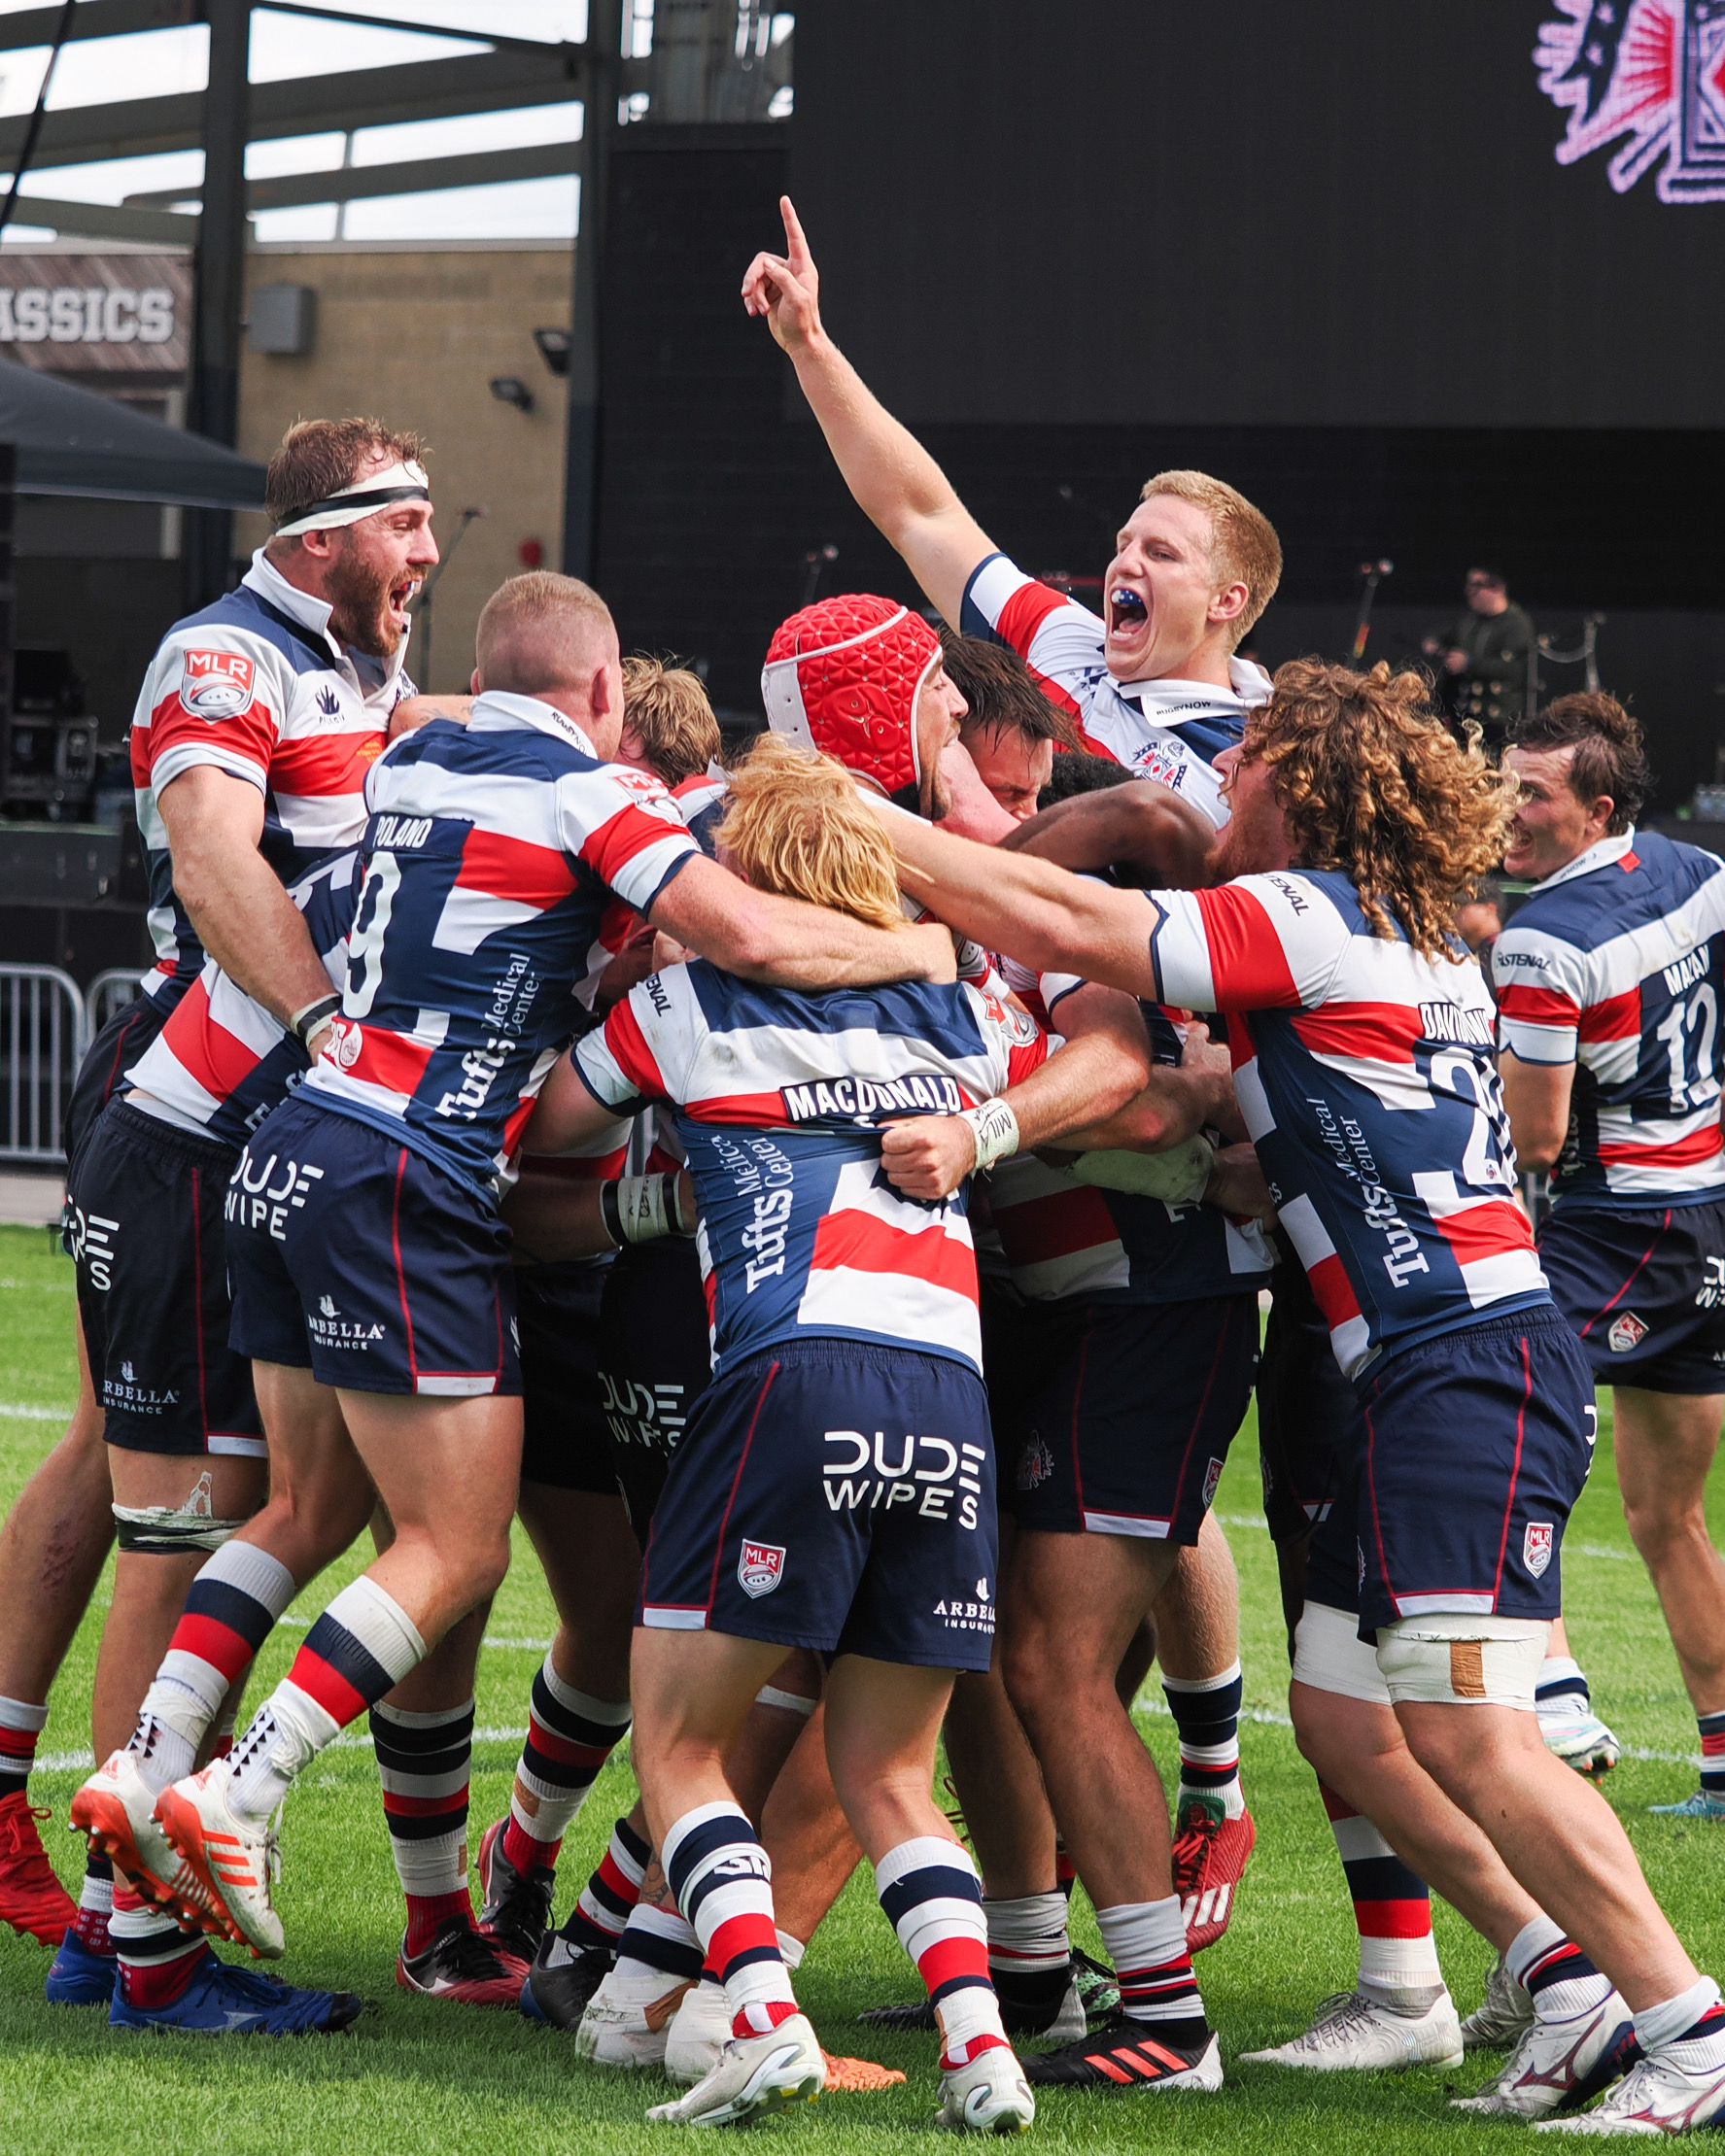 New England Free Jacks capture first Major League Rugby title in franchise history